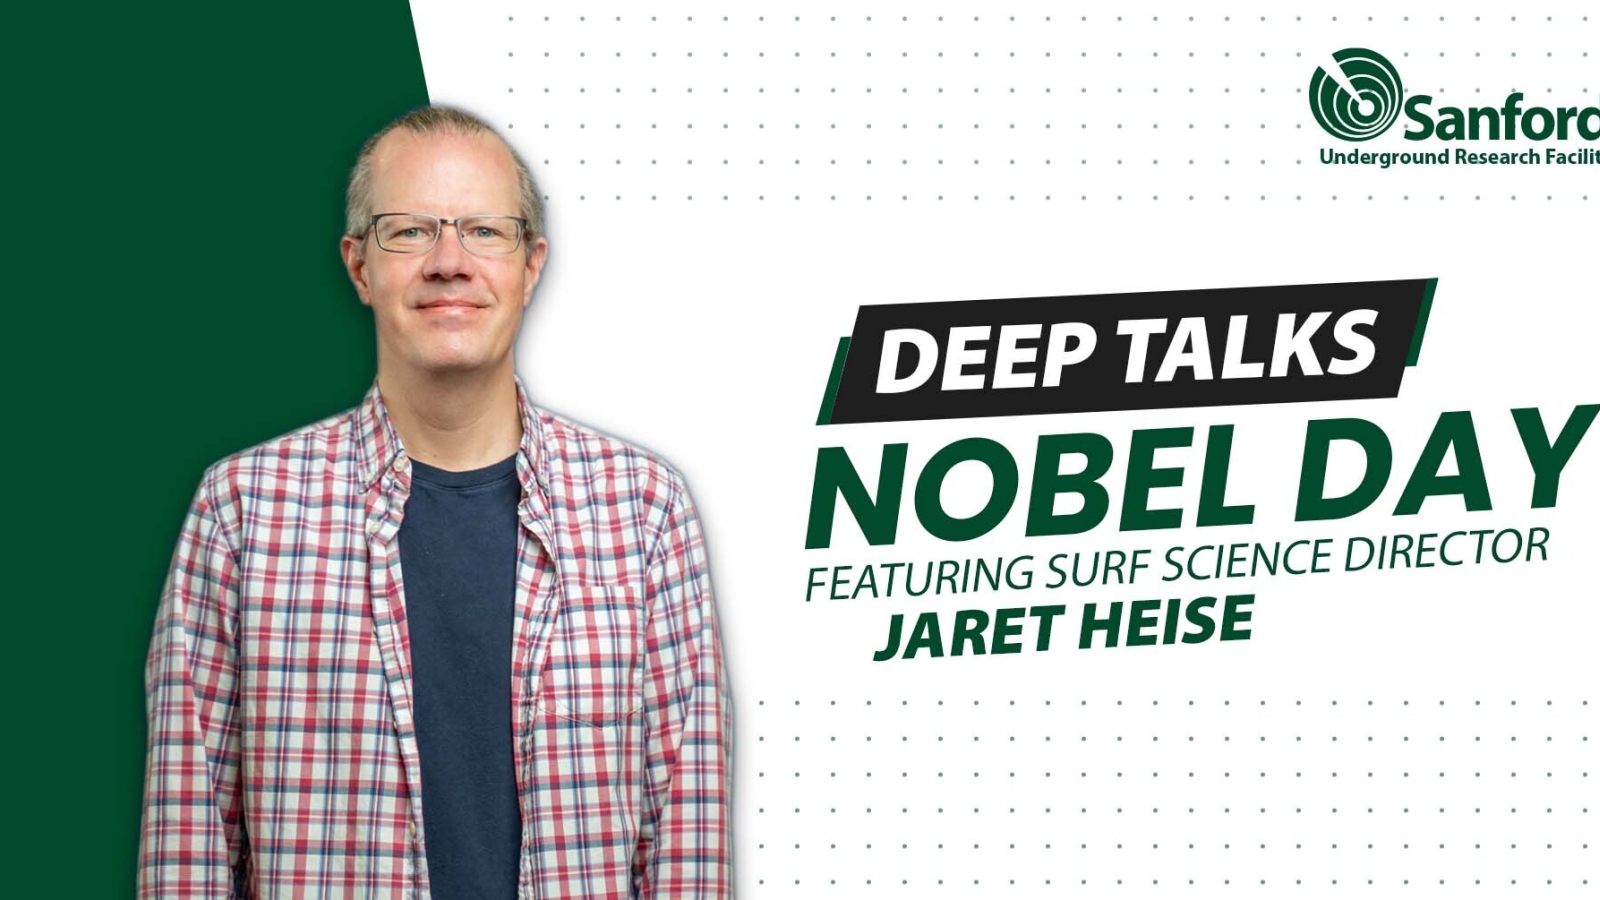 graphic includes a photo of a person smiling and the text "Deep Talks: Nobel Day featuring SURF science director Jaret Heise"